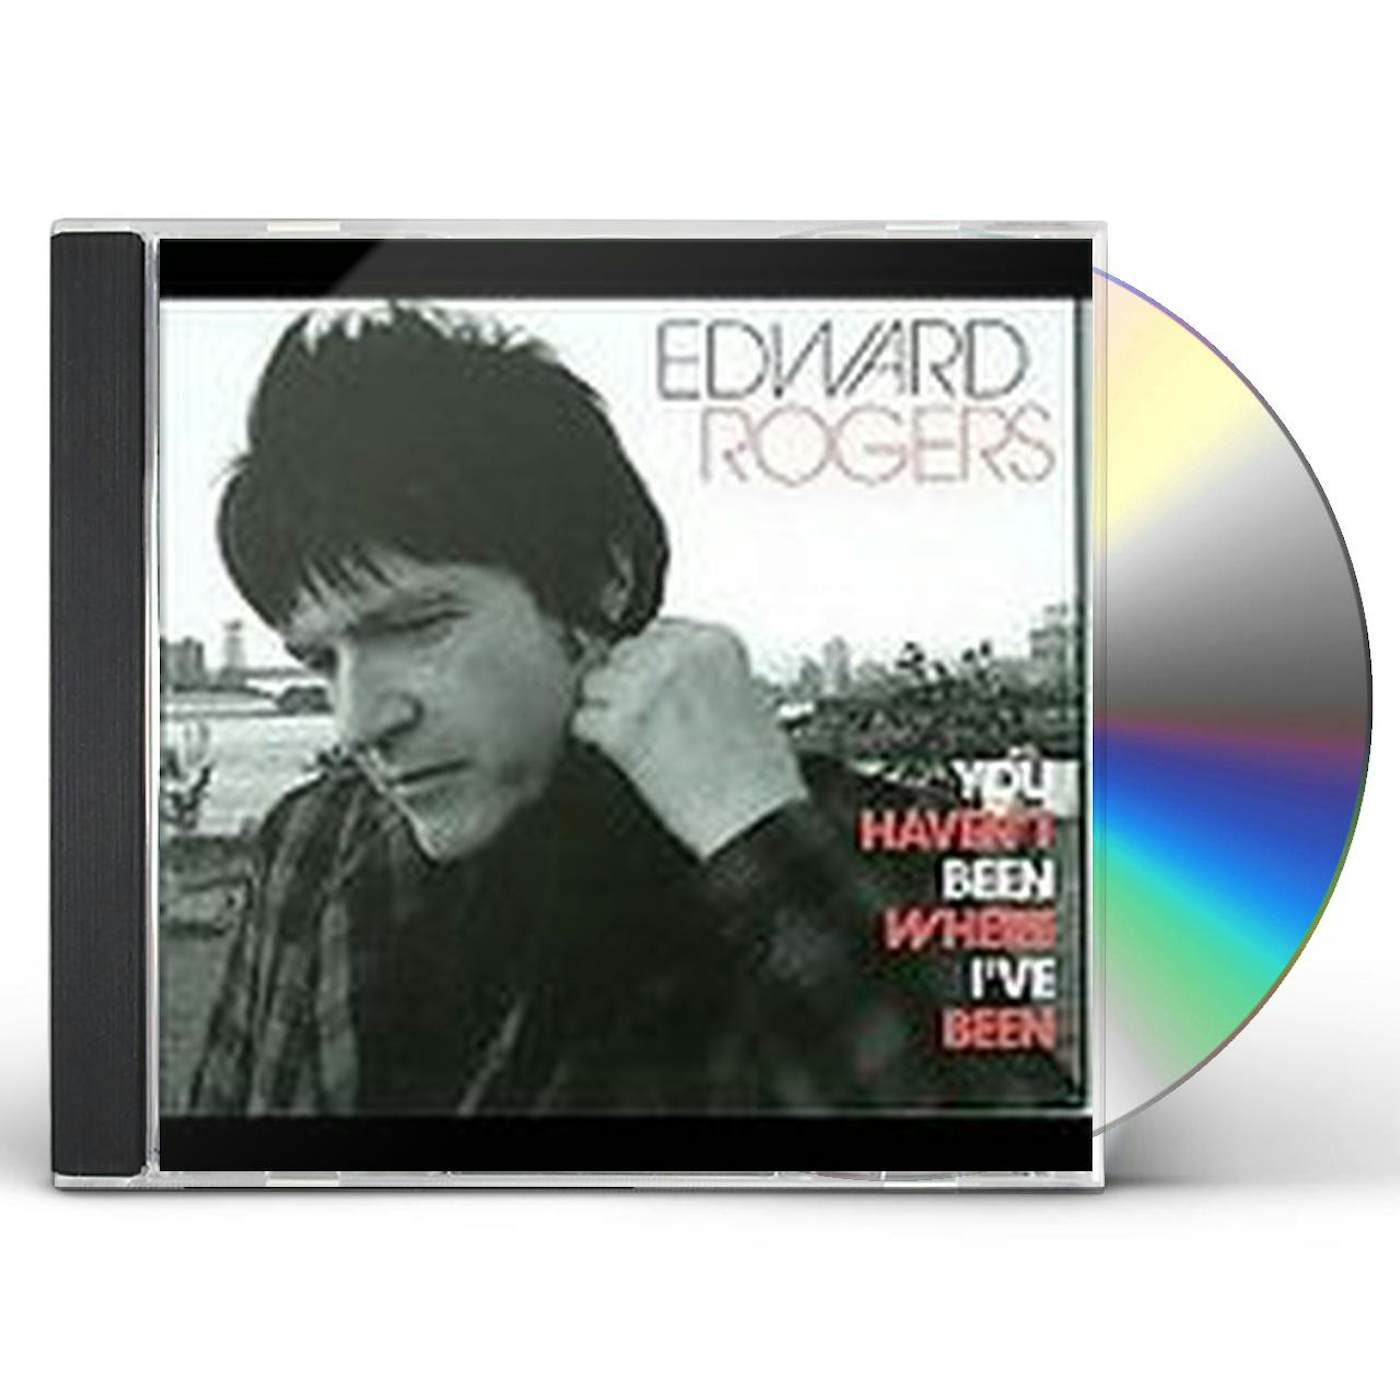 Edward Rogers YOU HAVEN'T BEEN WHERE I'VE BEEN CD